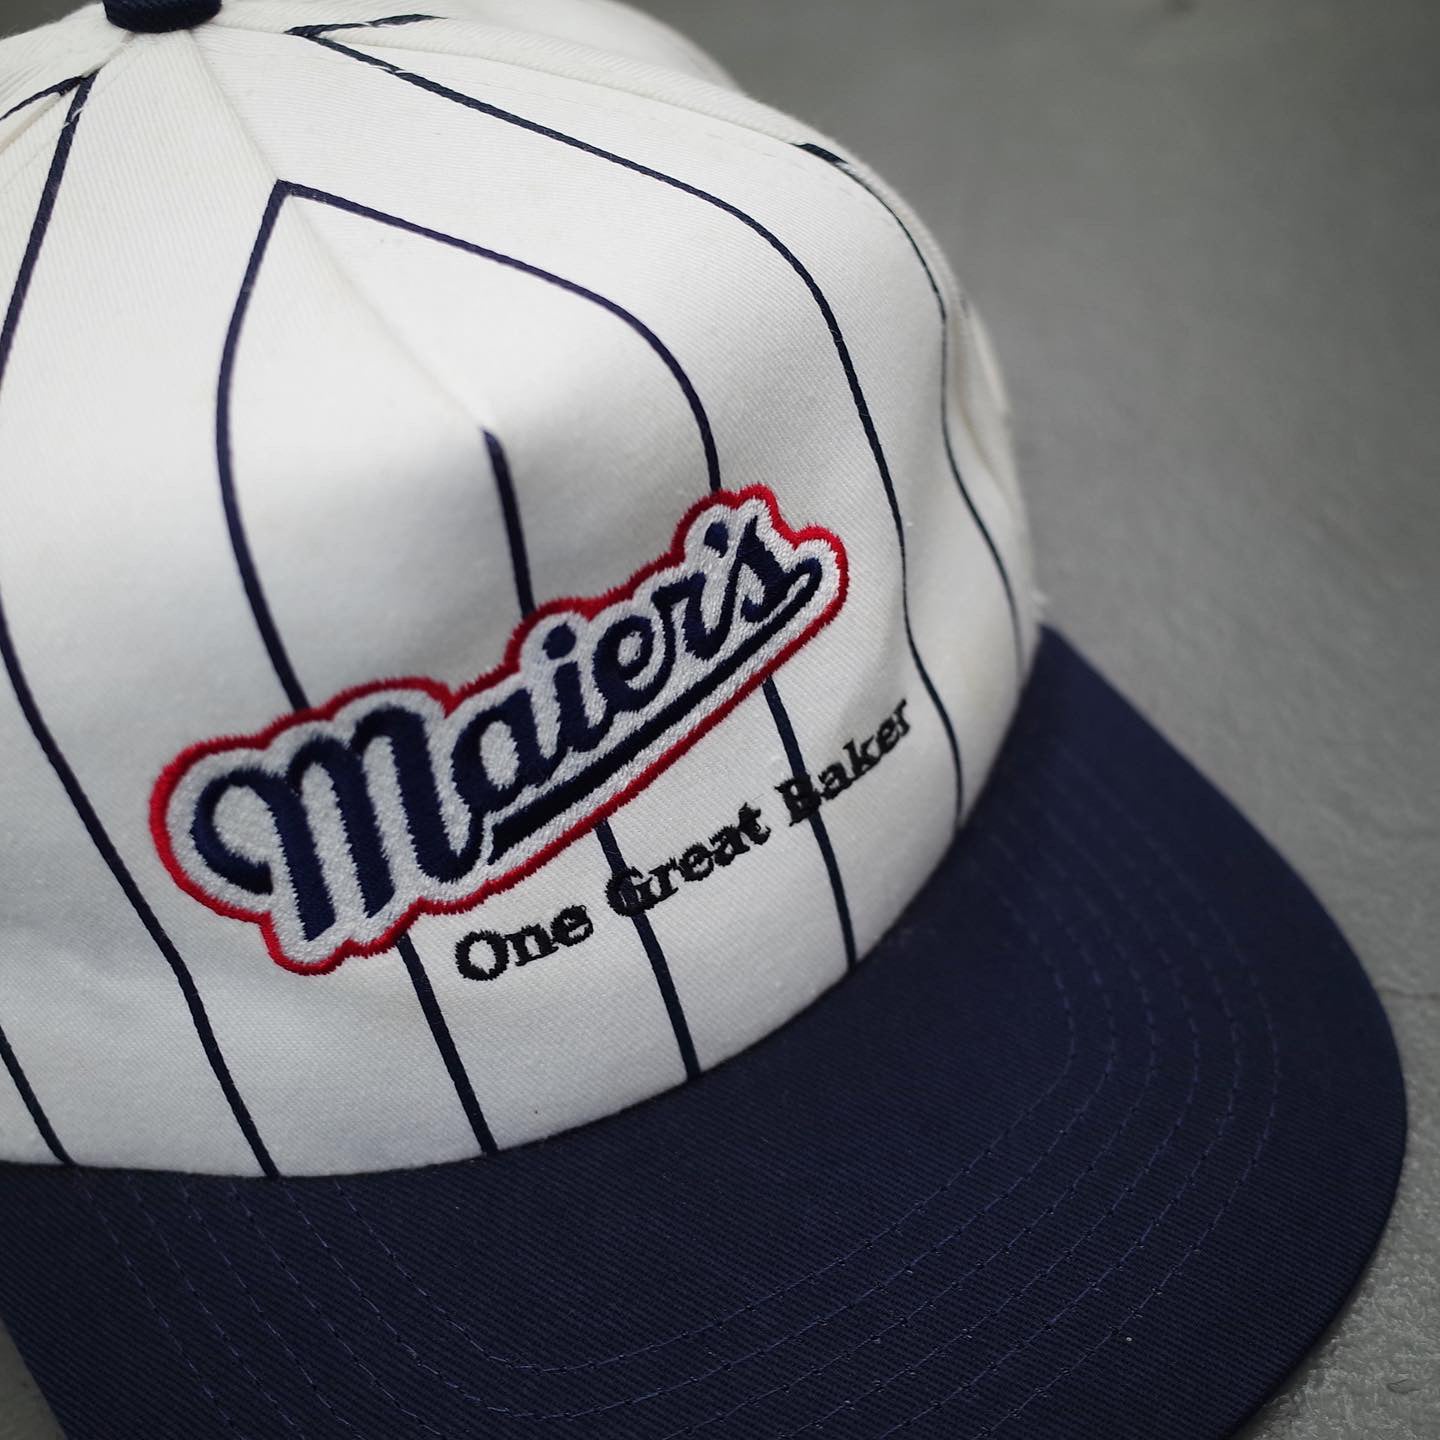 Maier’s One Great Baker Striped SnapBack